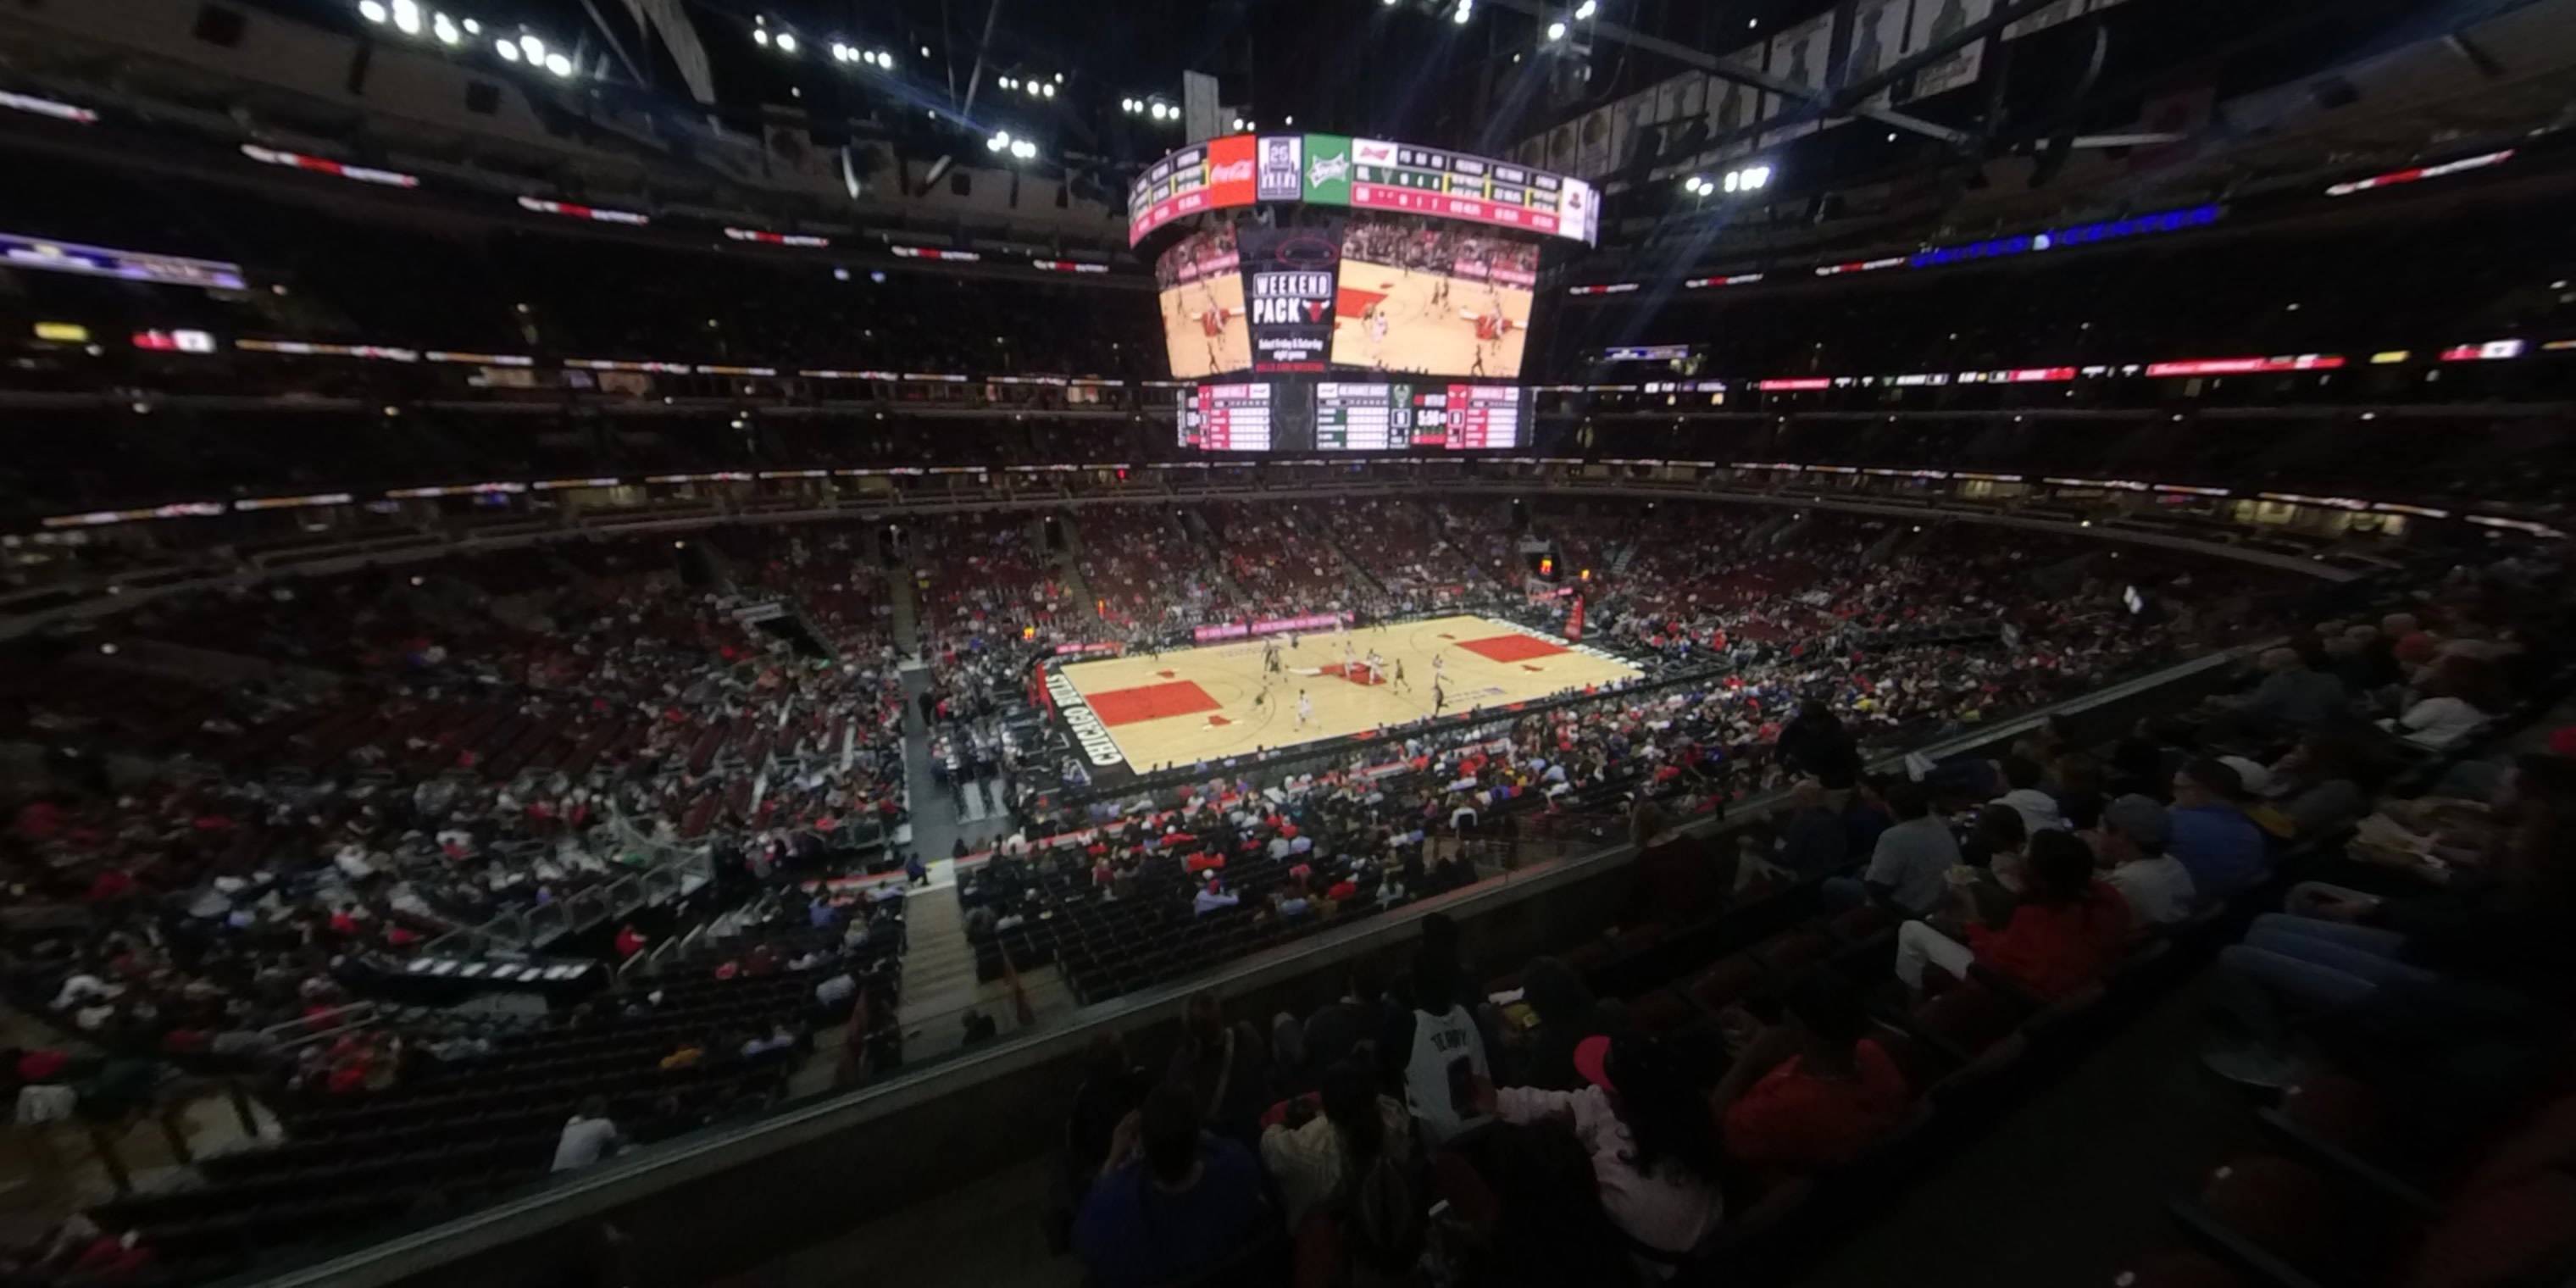 section 219 panoramic seat view  for basketball - united center